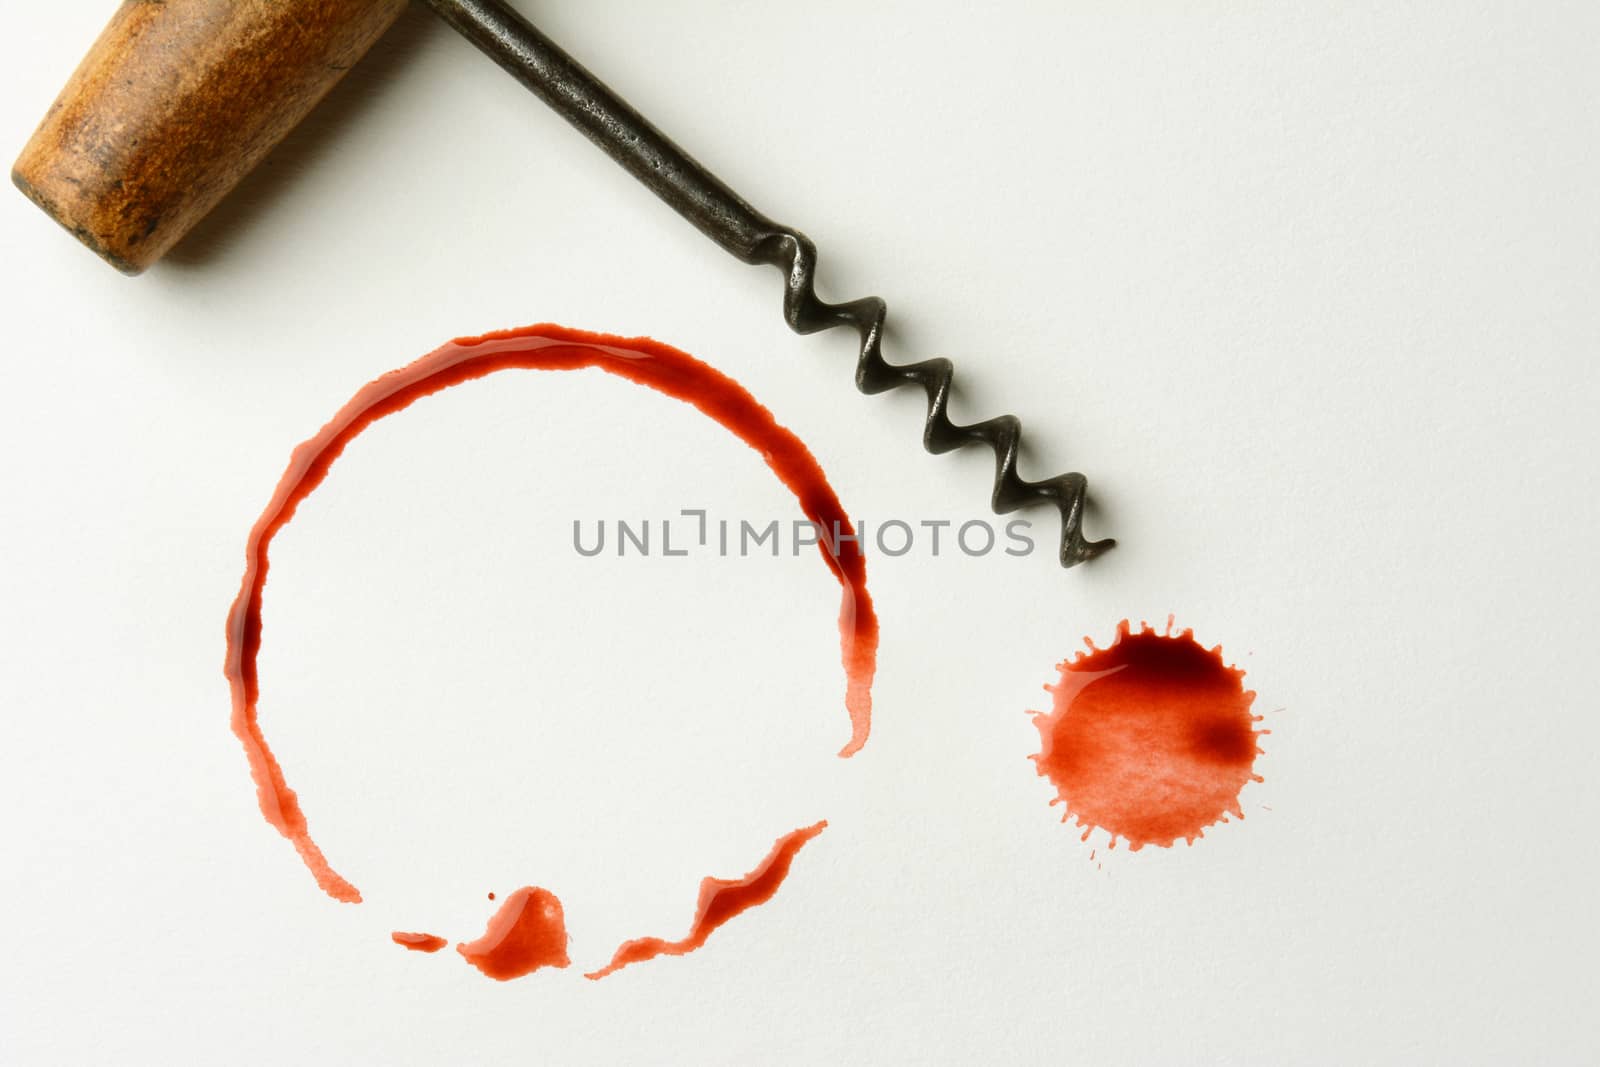 Wine stains cork and antique corkscrew on paper. Fills the frame, in horizontal format. The stains are from a bottle bottom and drips.